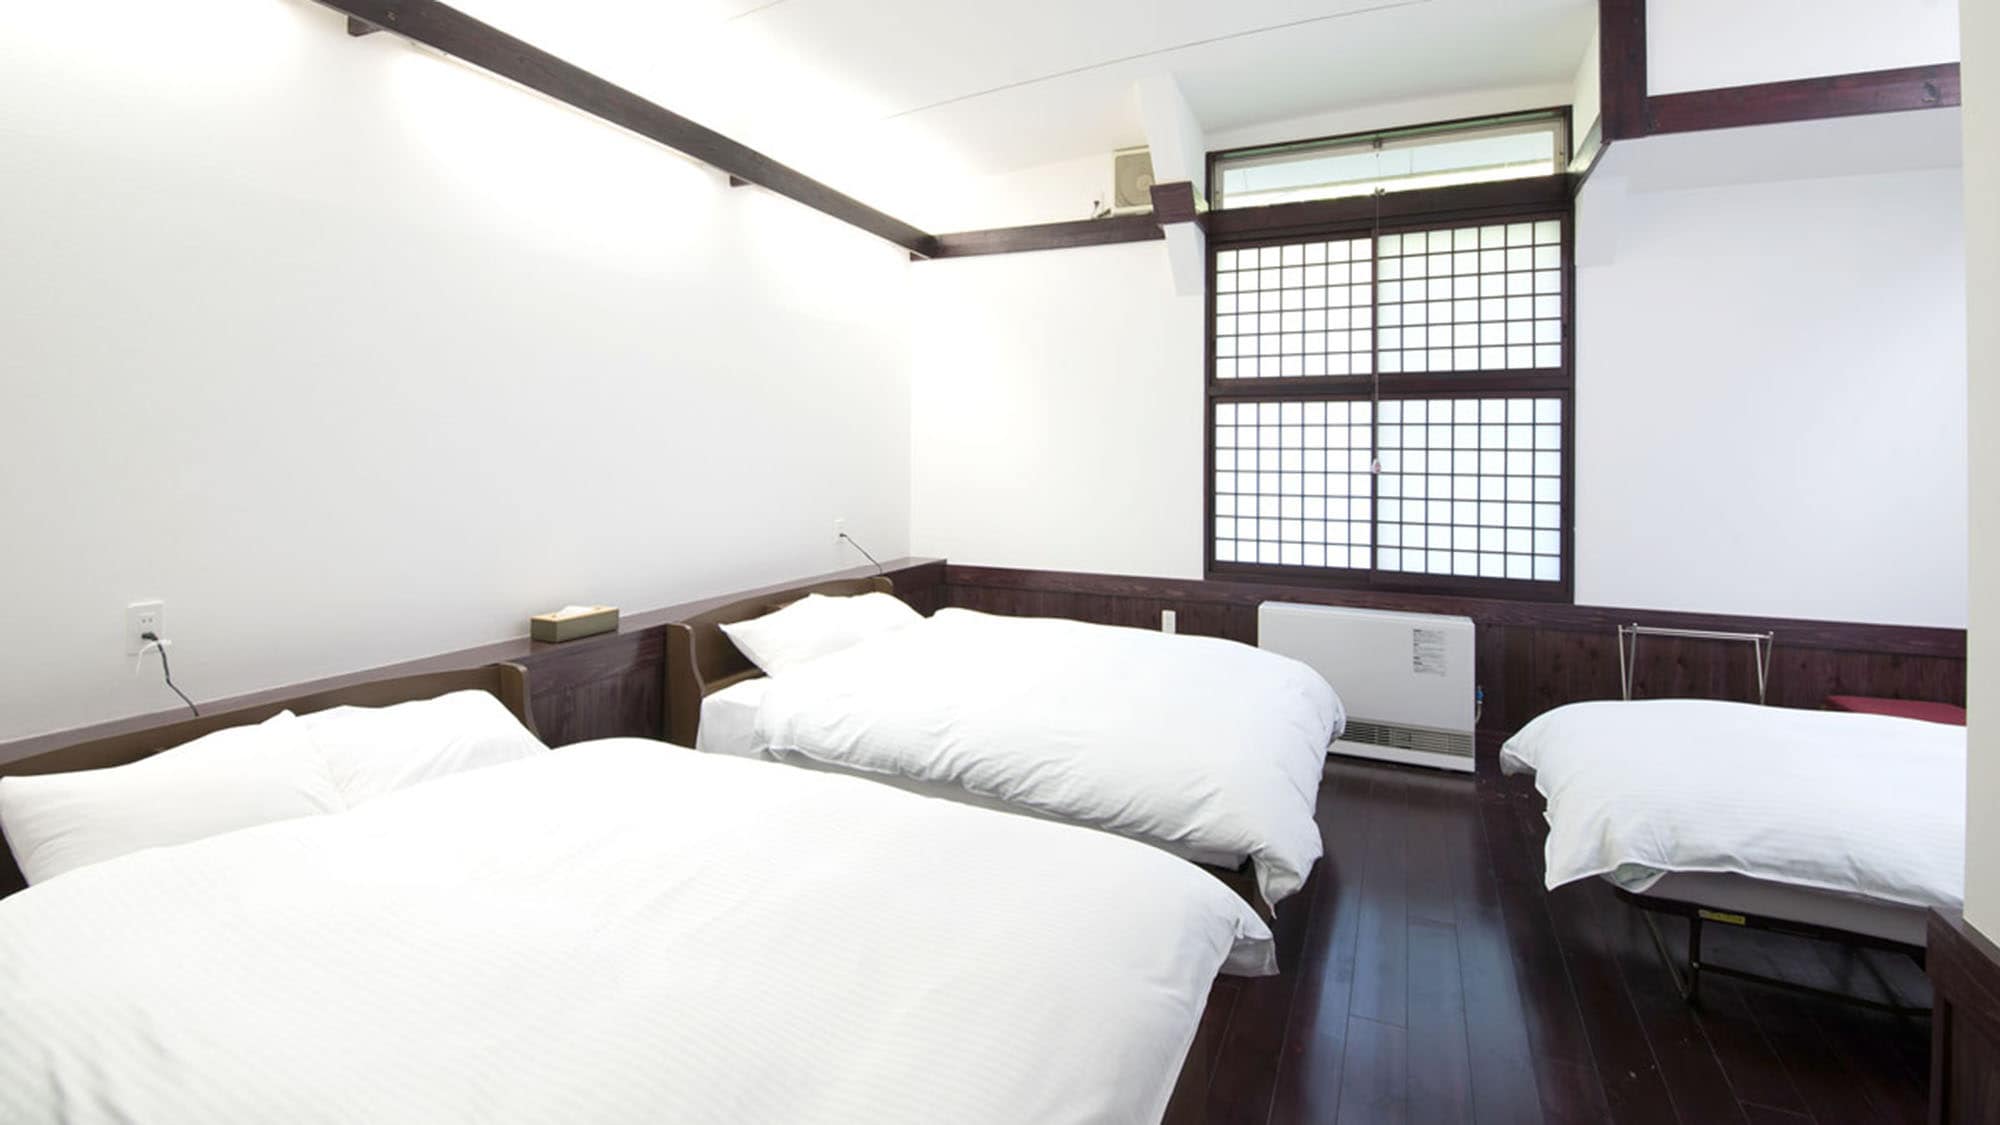 ・ Twin room for 3 people Up to 1 person can use existing bed